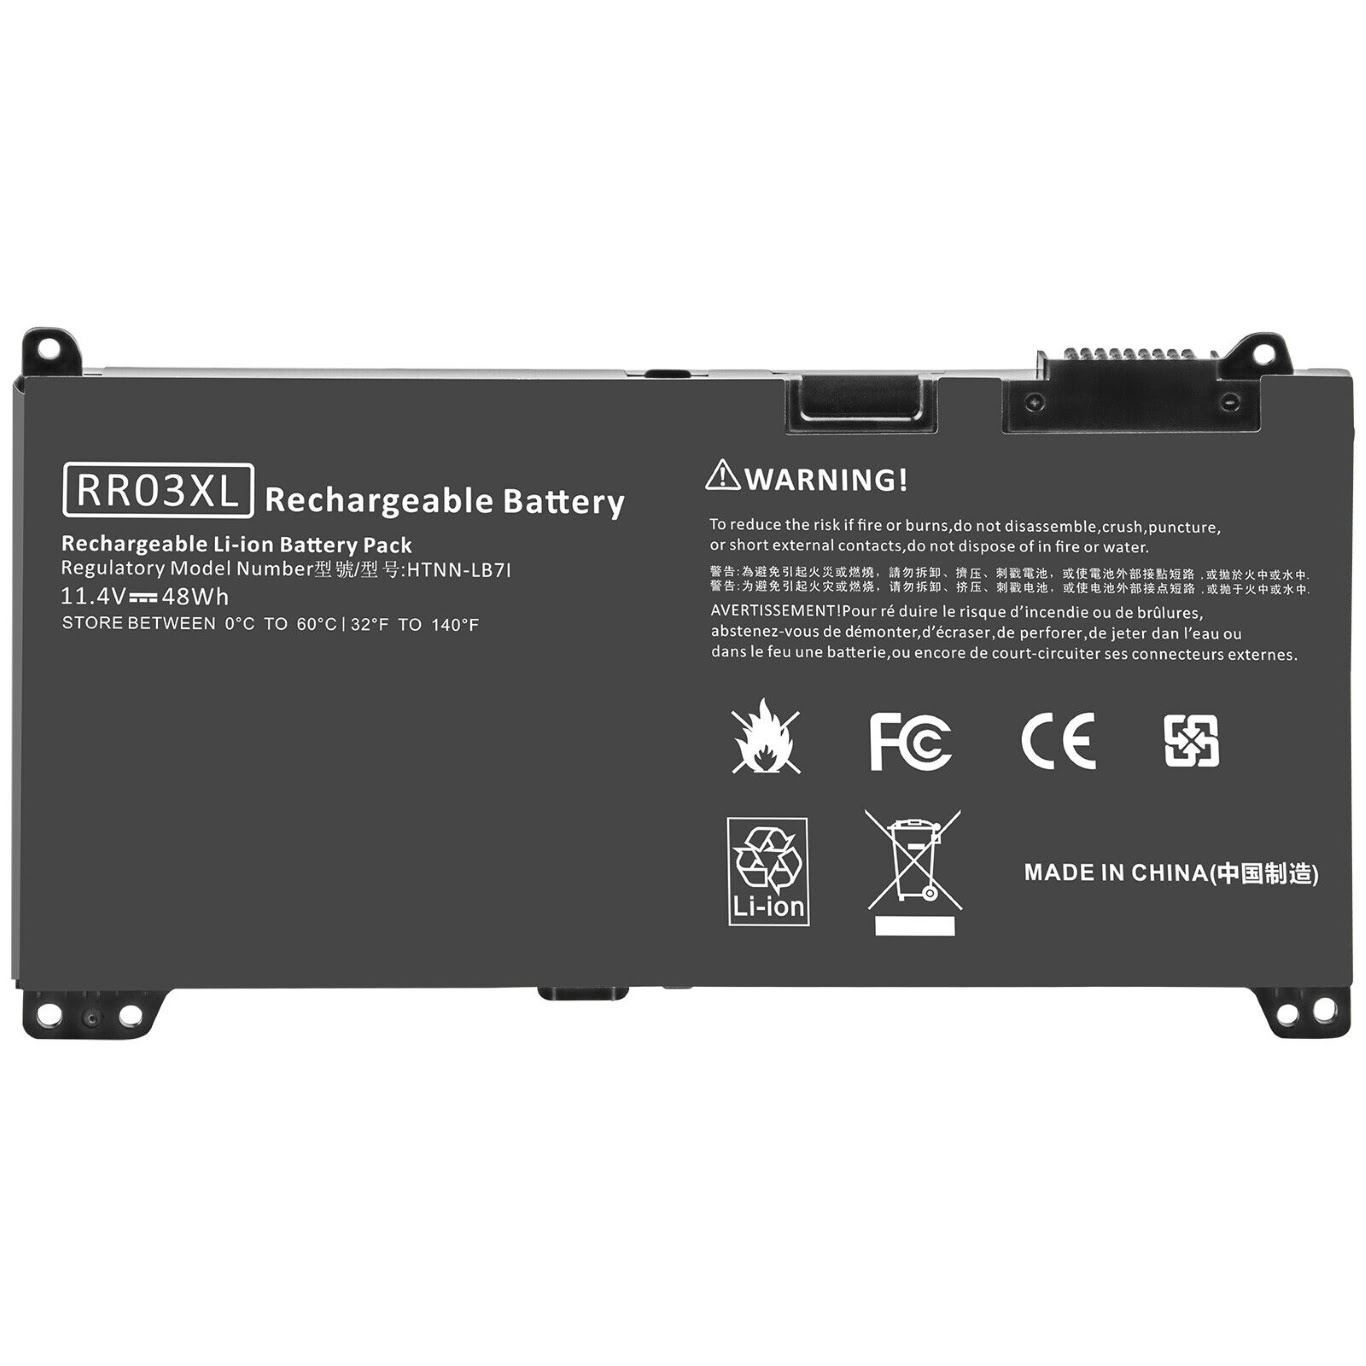 851477-421, 851477-541 replacement Laptop Battery for HP ProBook 430 G4, ProBook 440 G4, 11.4v, 48wh, 6 cells